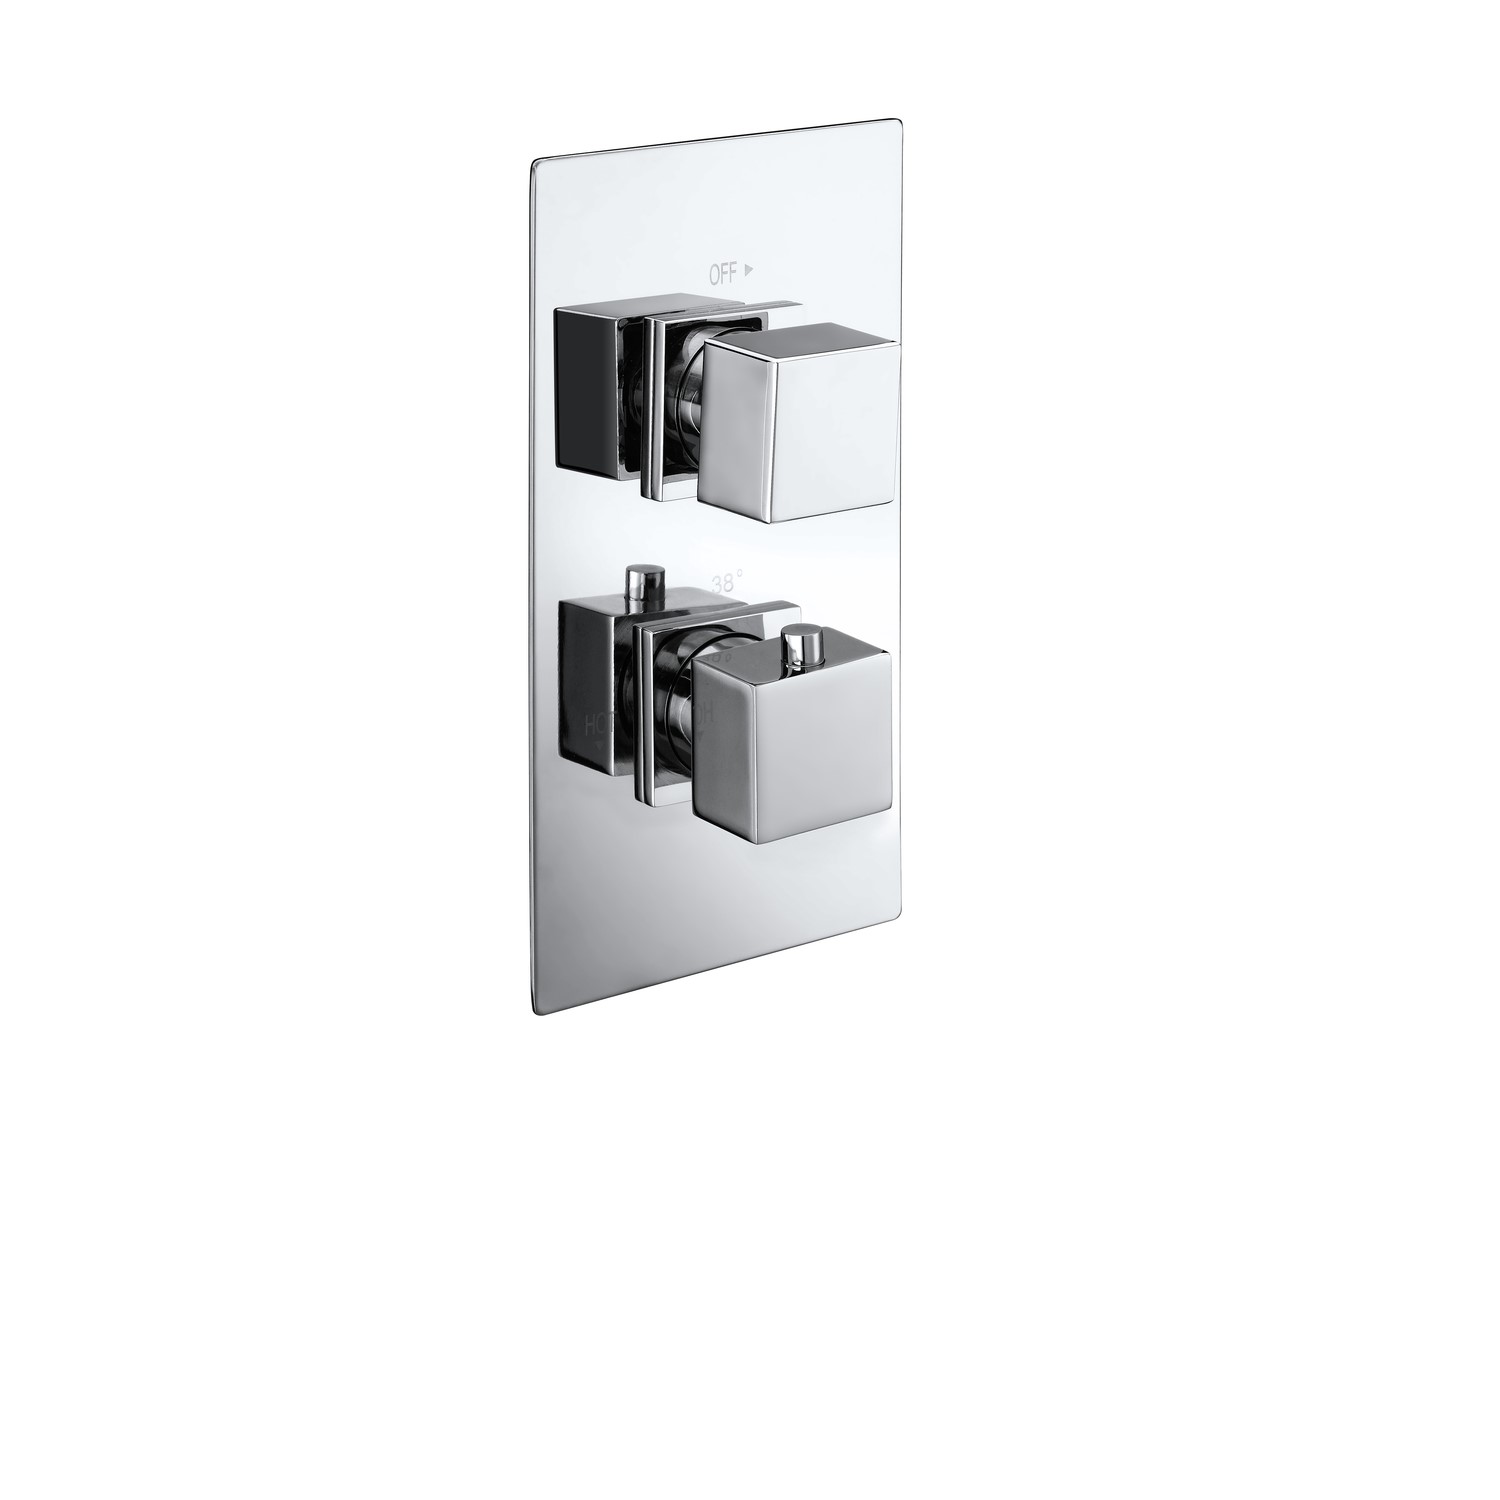 Cube square twin shower valve - 1 outlet